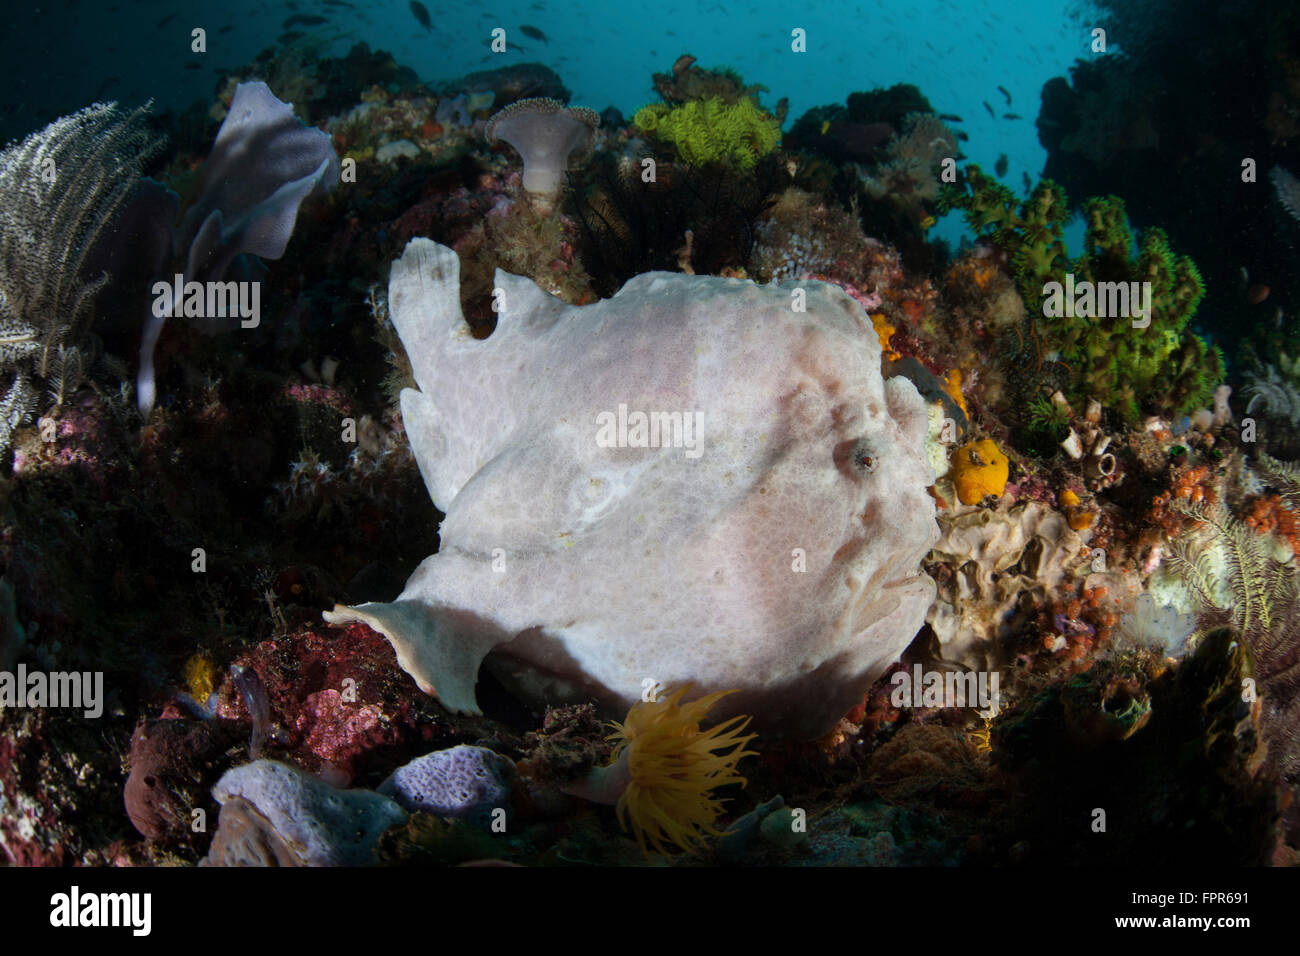 A giant frogfish (Antennarius commerson) blends into its reef surroundings in Komodo National Park, Indonesia. This beautiful ar Stock Photo